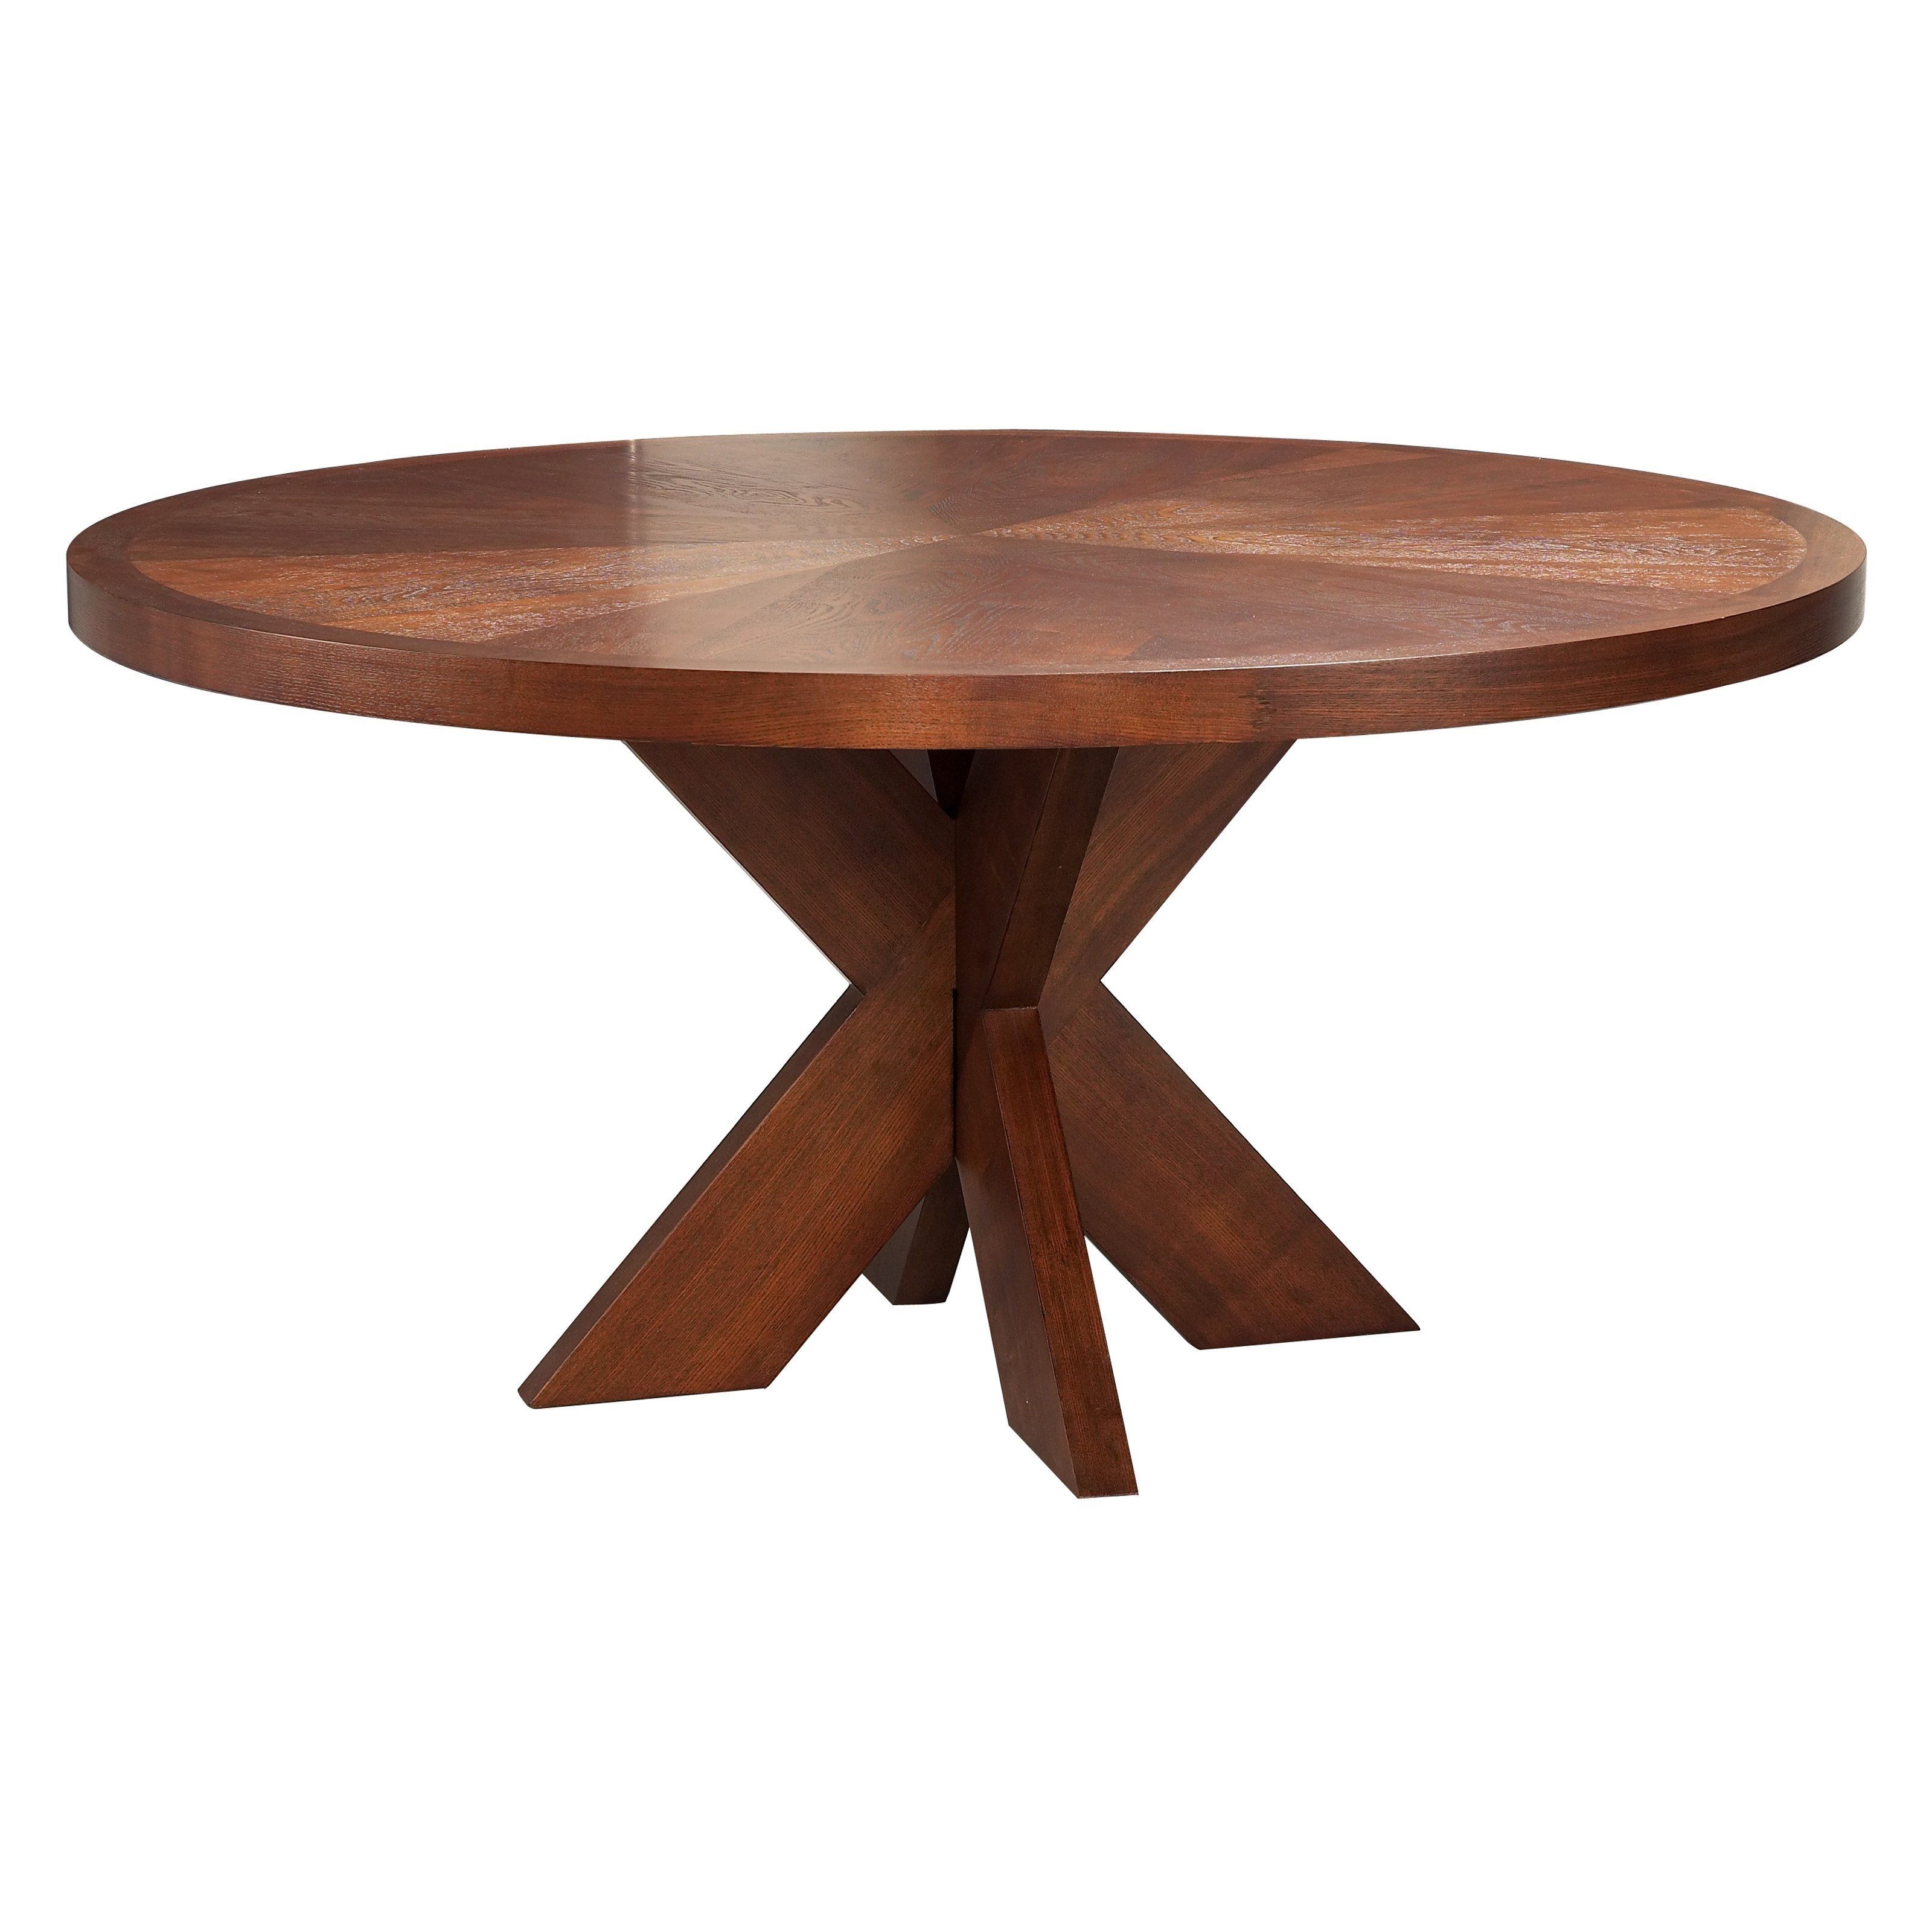 Hudson Round Dining Tables Within Favorite Have To Have It. Hudson Round X Base Dining Table – Mocha $ (View 5 of 25)